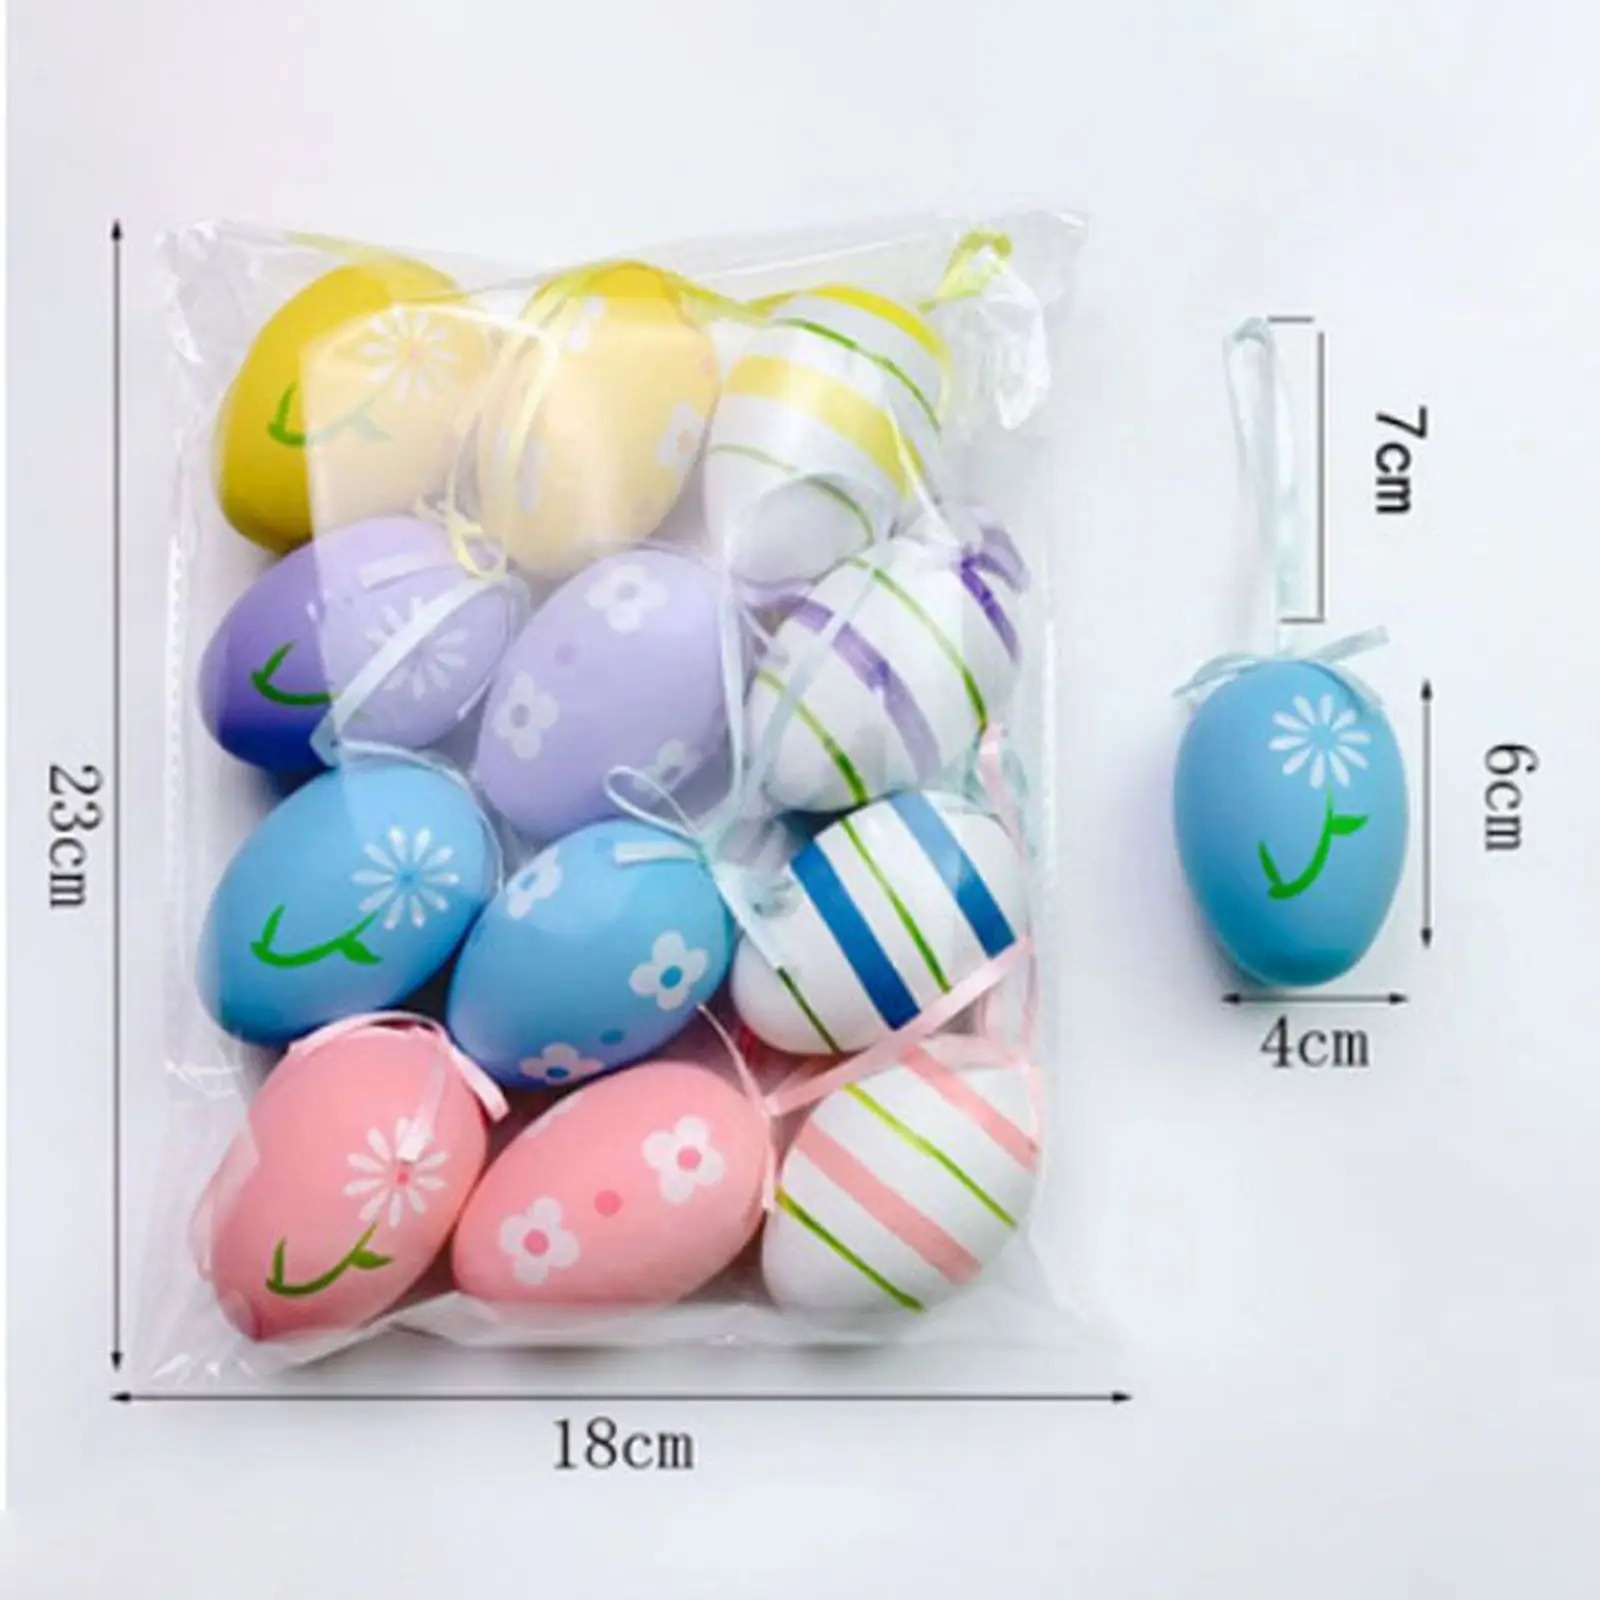 

12pcs Foam Easter Eggs Happy Easter Decorations Painted Bird Pigeon Eggs DIY Craft Kids Gift Favor Home Decor Easter Party